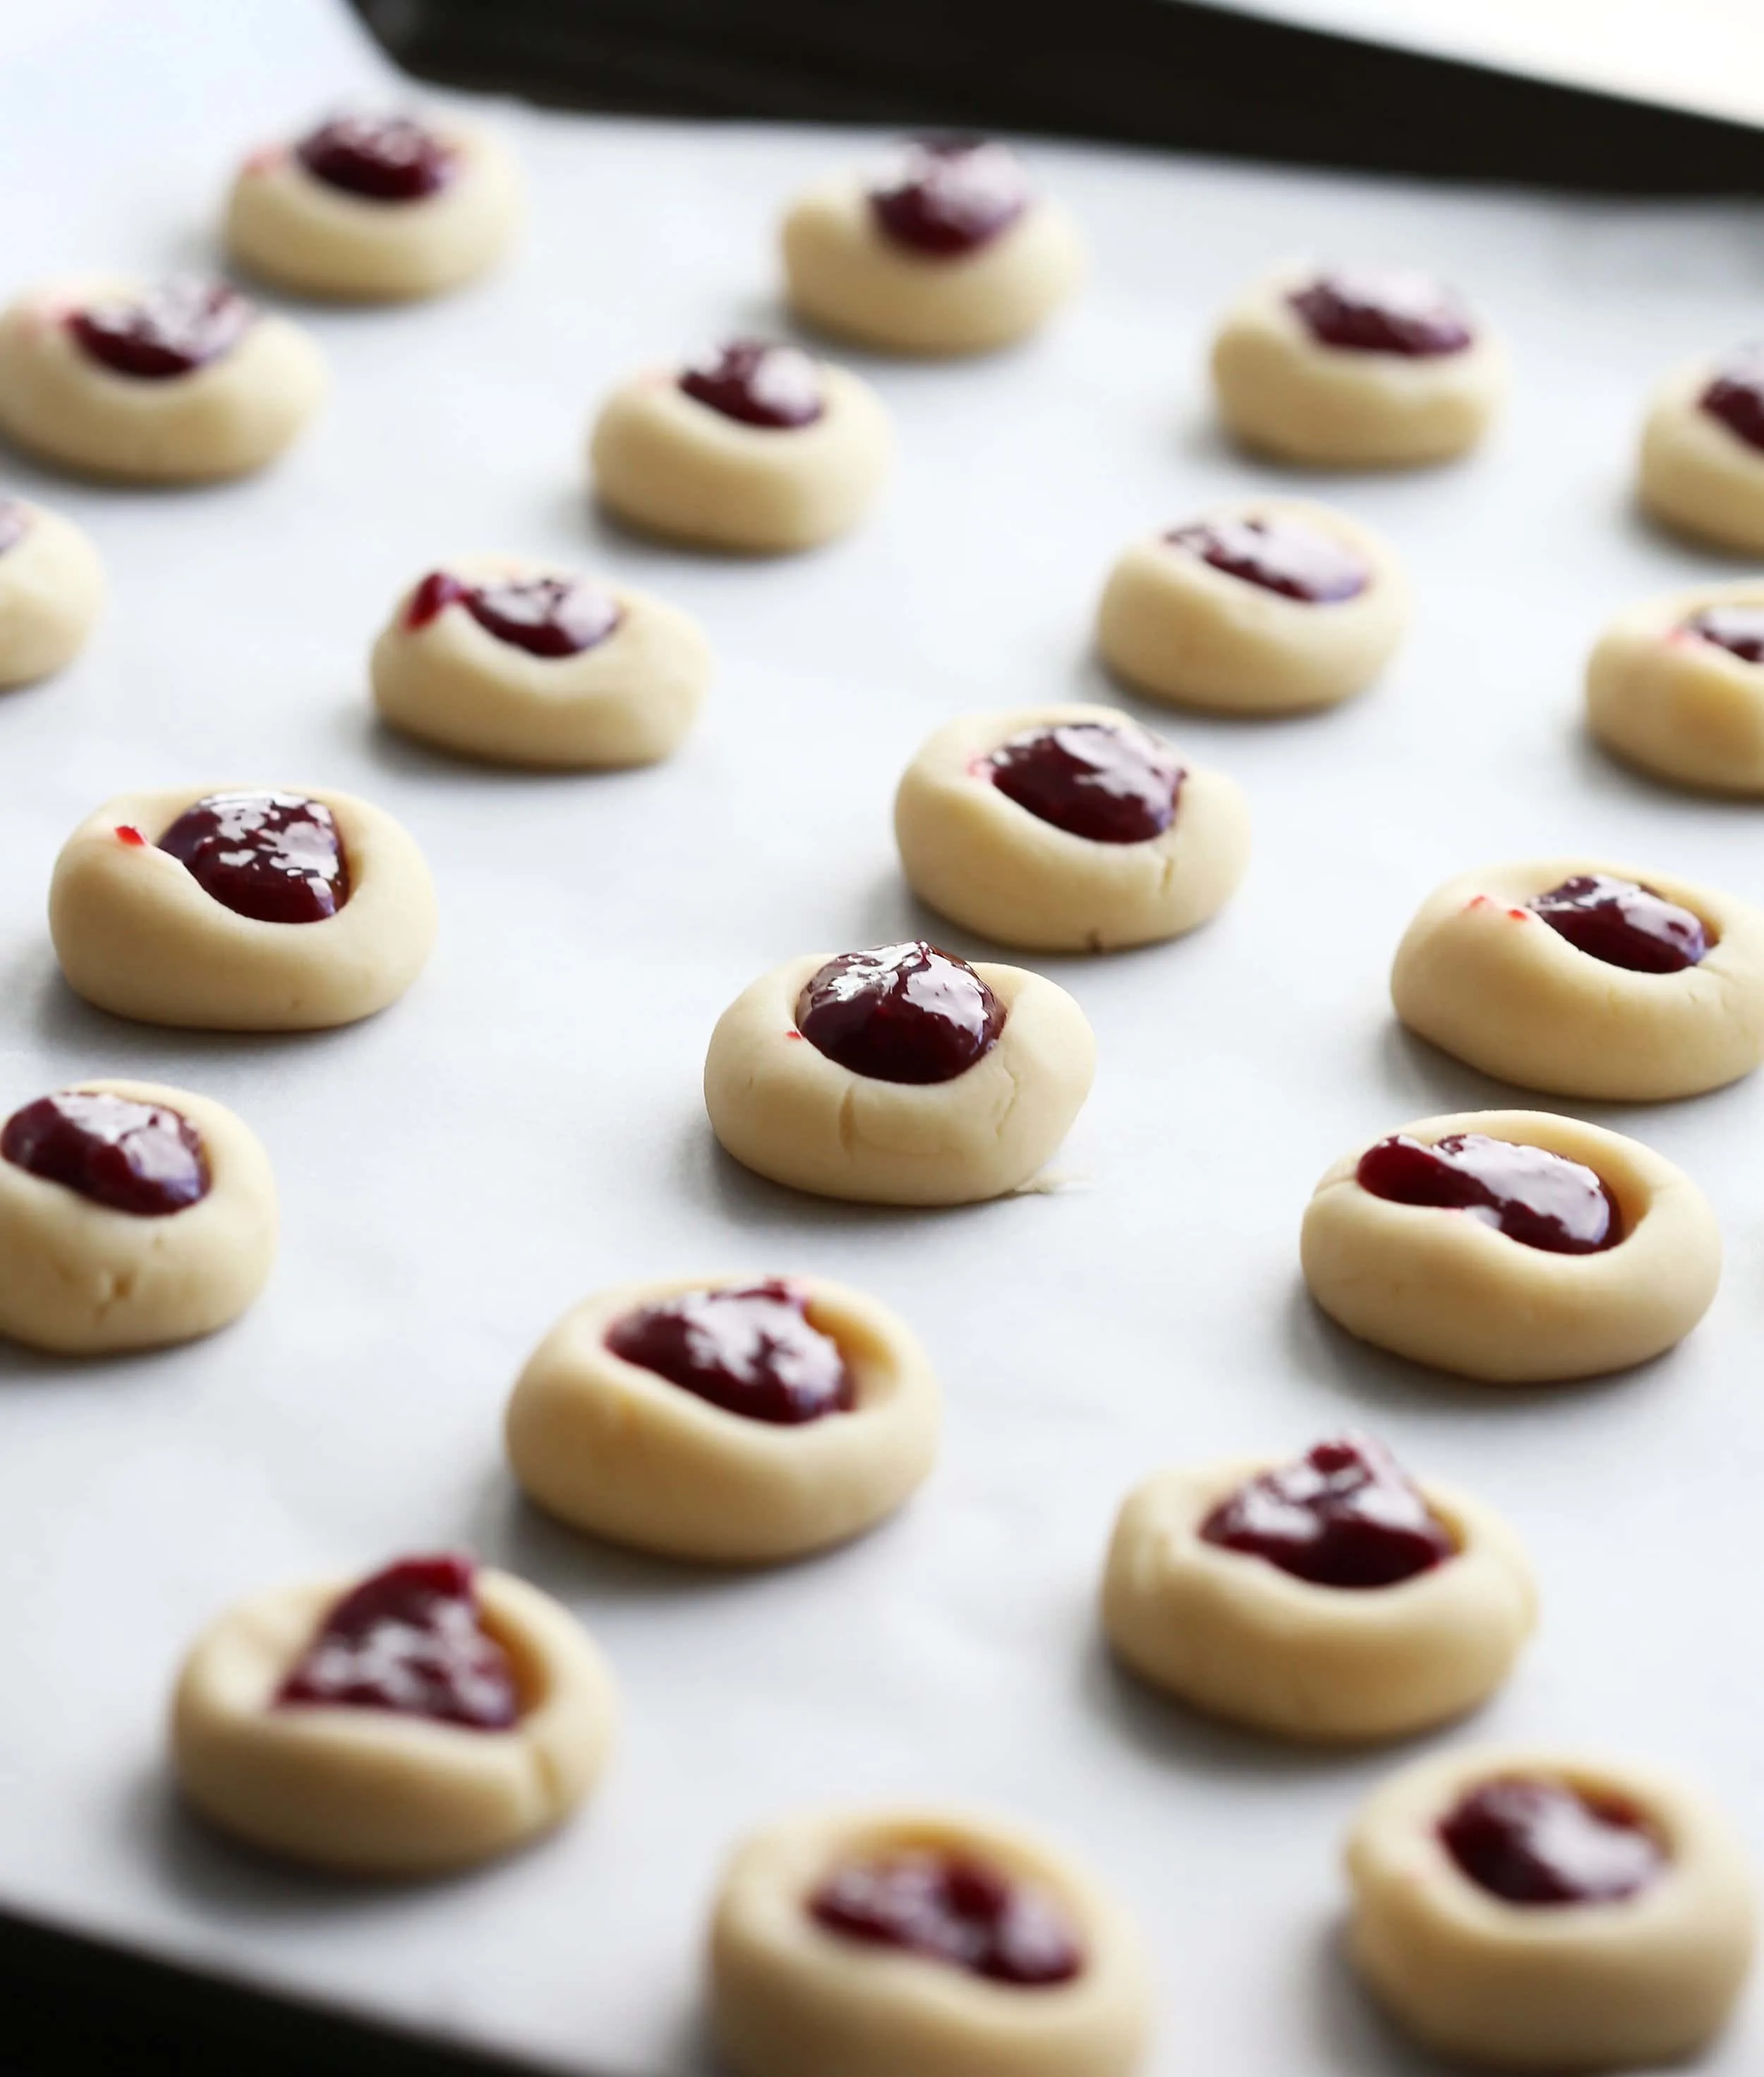 Unbaked shortbread cookies with a thumbprint indentation that’s filled with raspberry jam on a baking sheet.